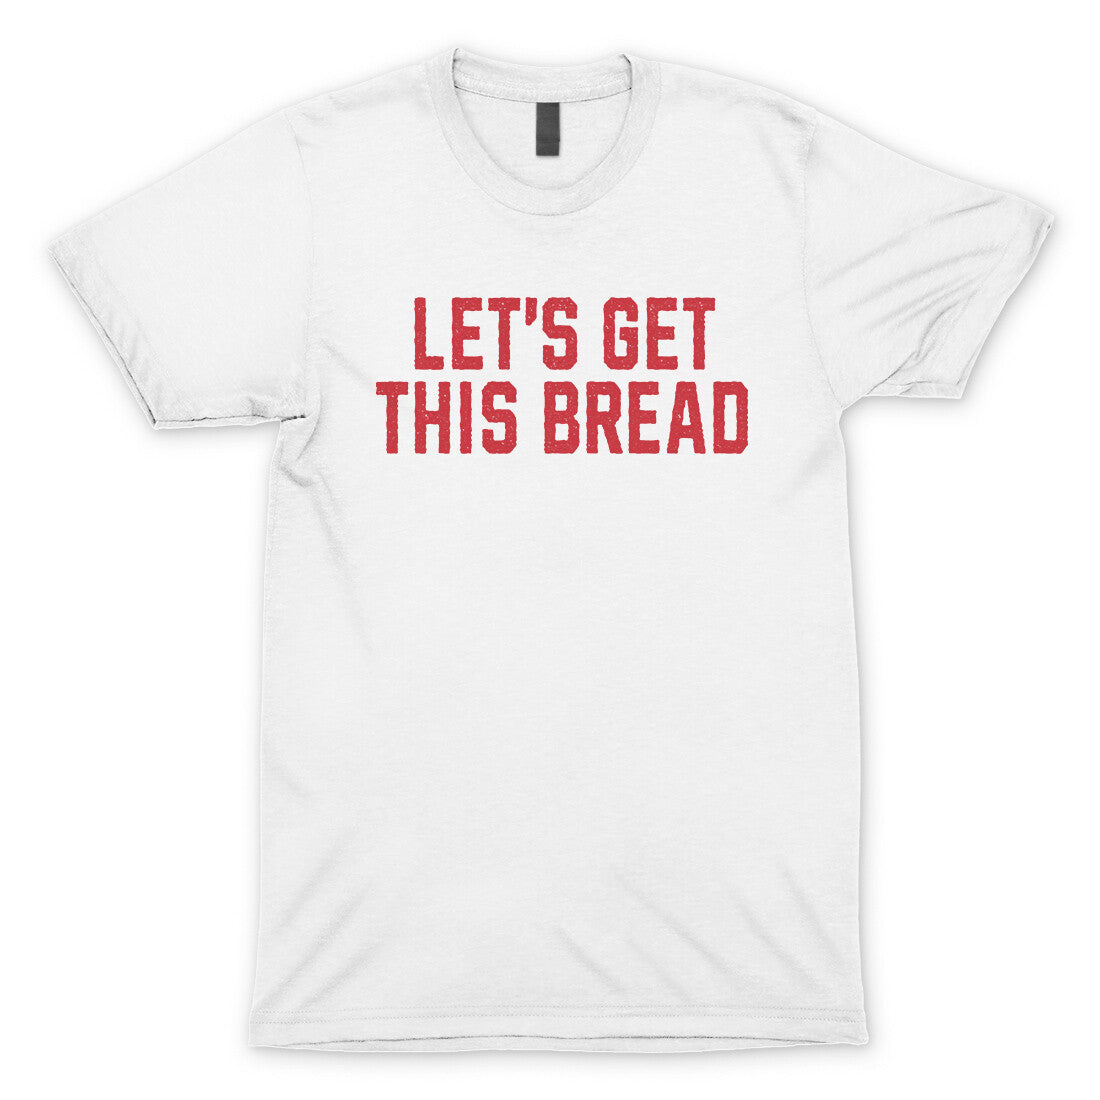 Let's Get This Bread in White Color